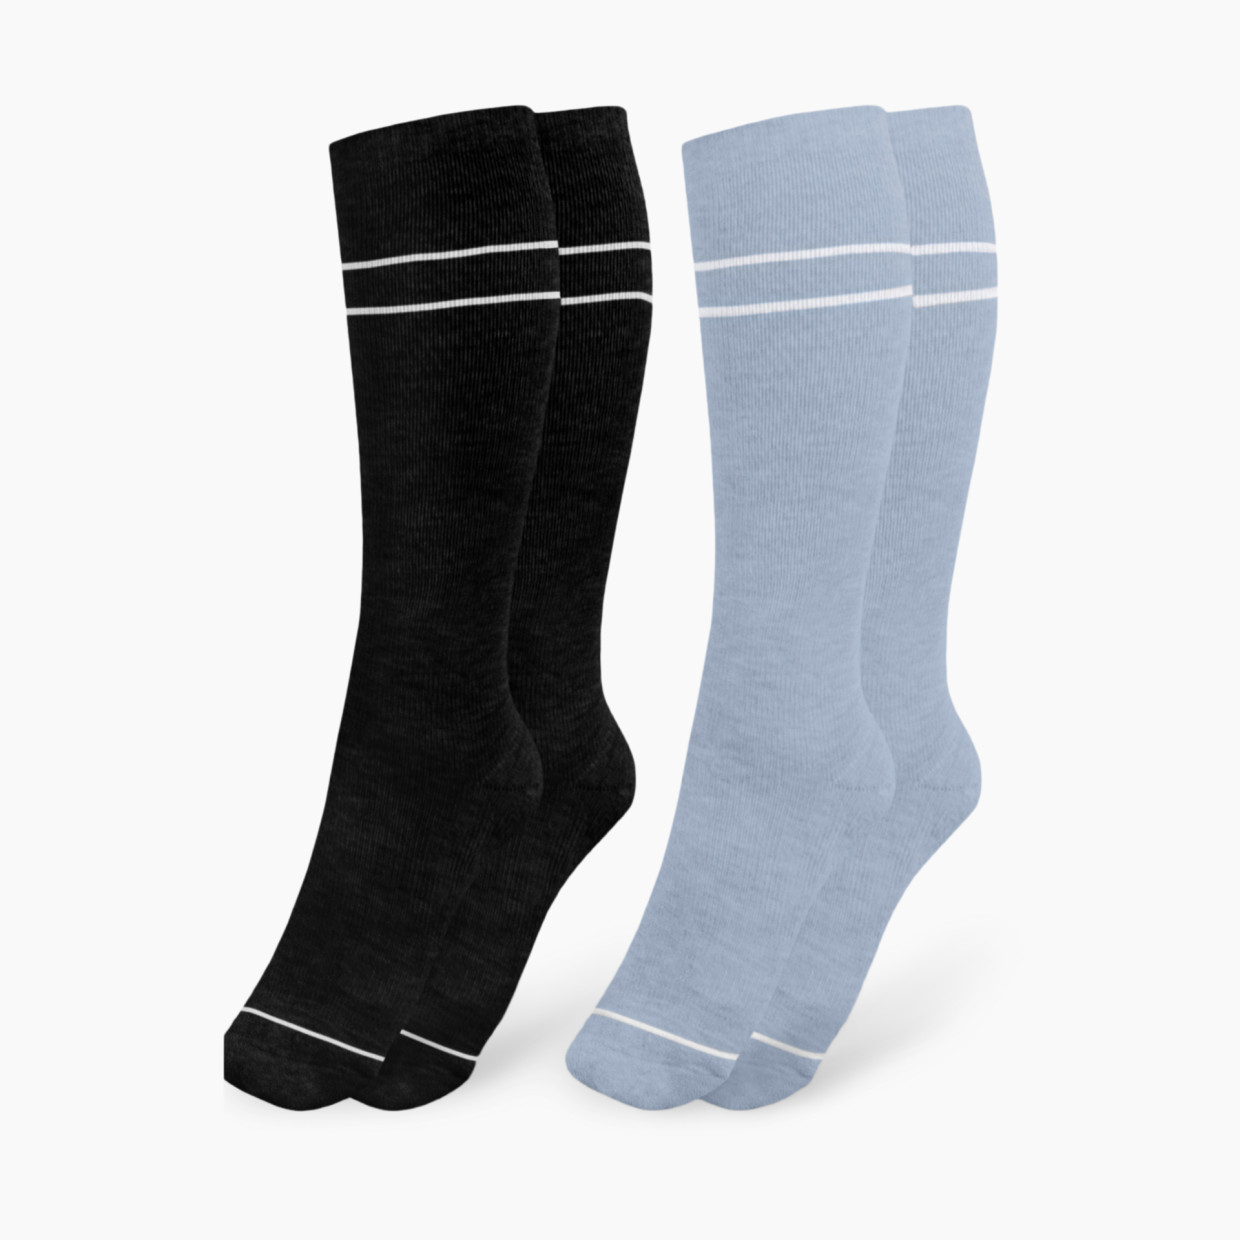 Kindred Bravely Premium Maternity Compression Socks (2-Pack) - Stone Blue And Black, Os.